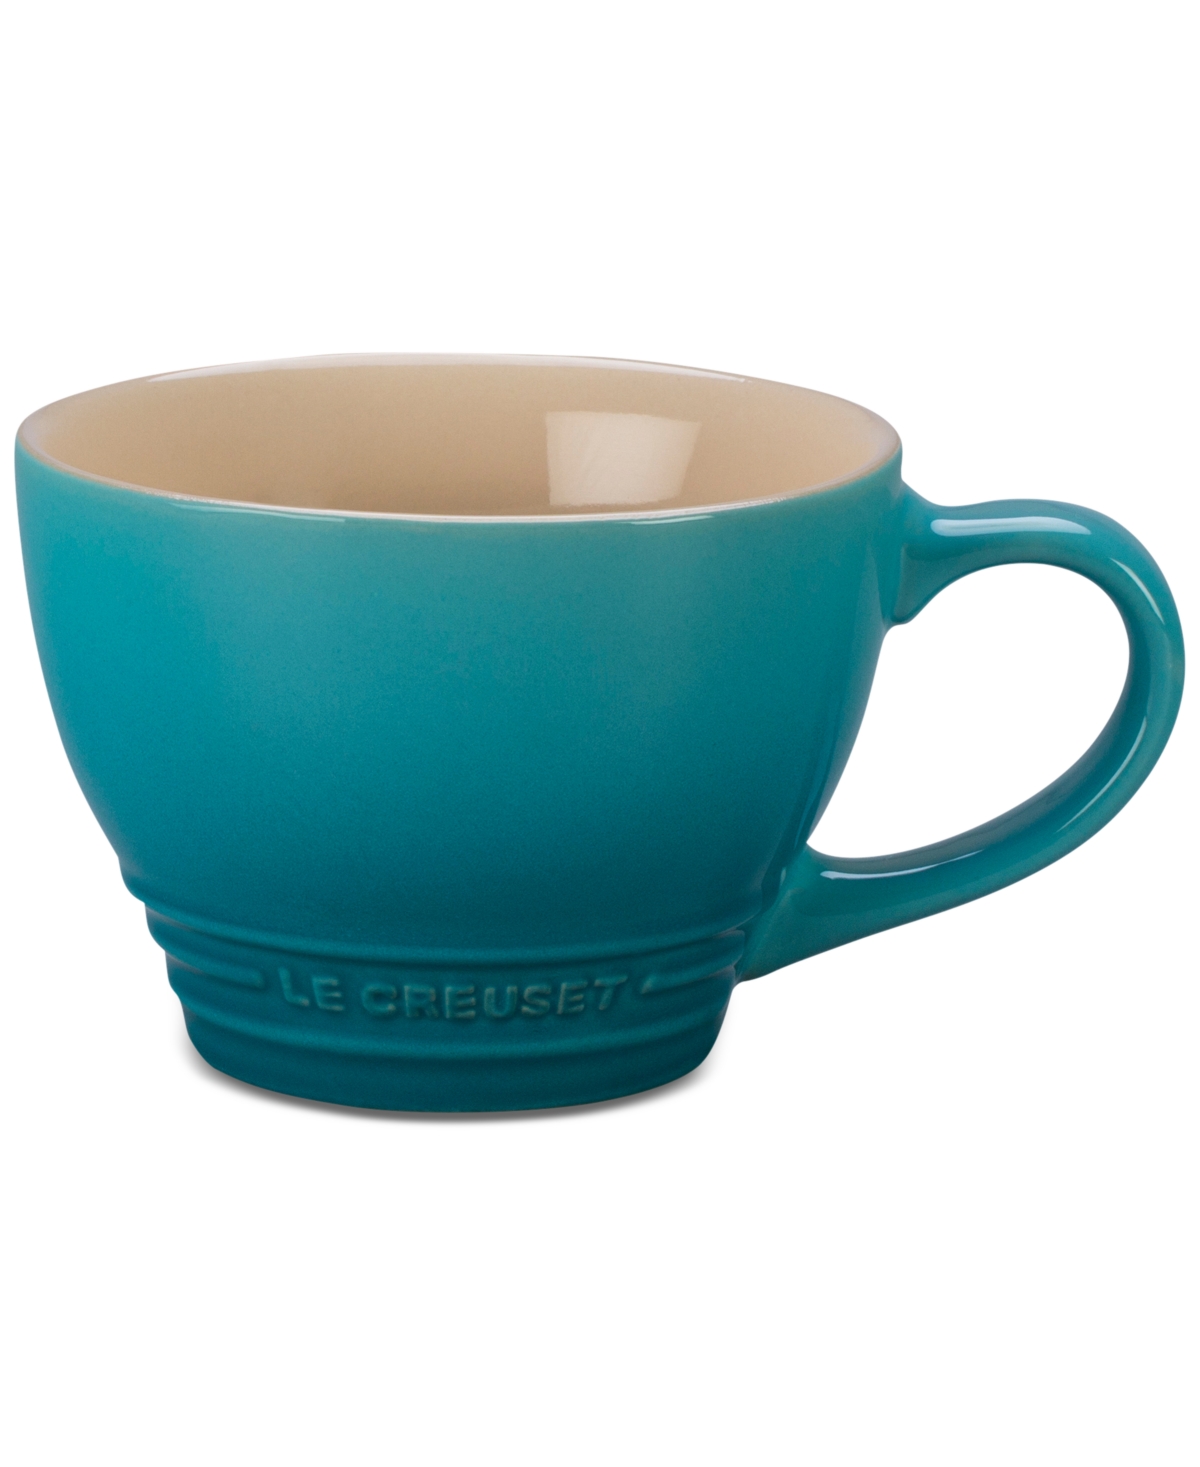 14 ounce Stoneware Bistro Style Coffee Mug - Oyster